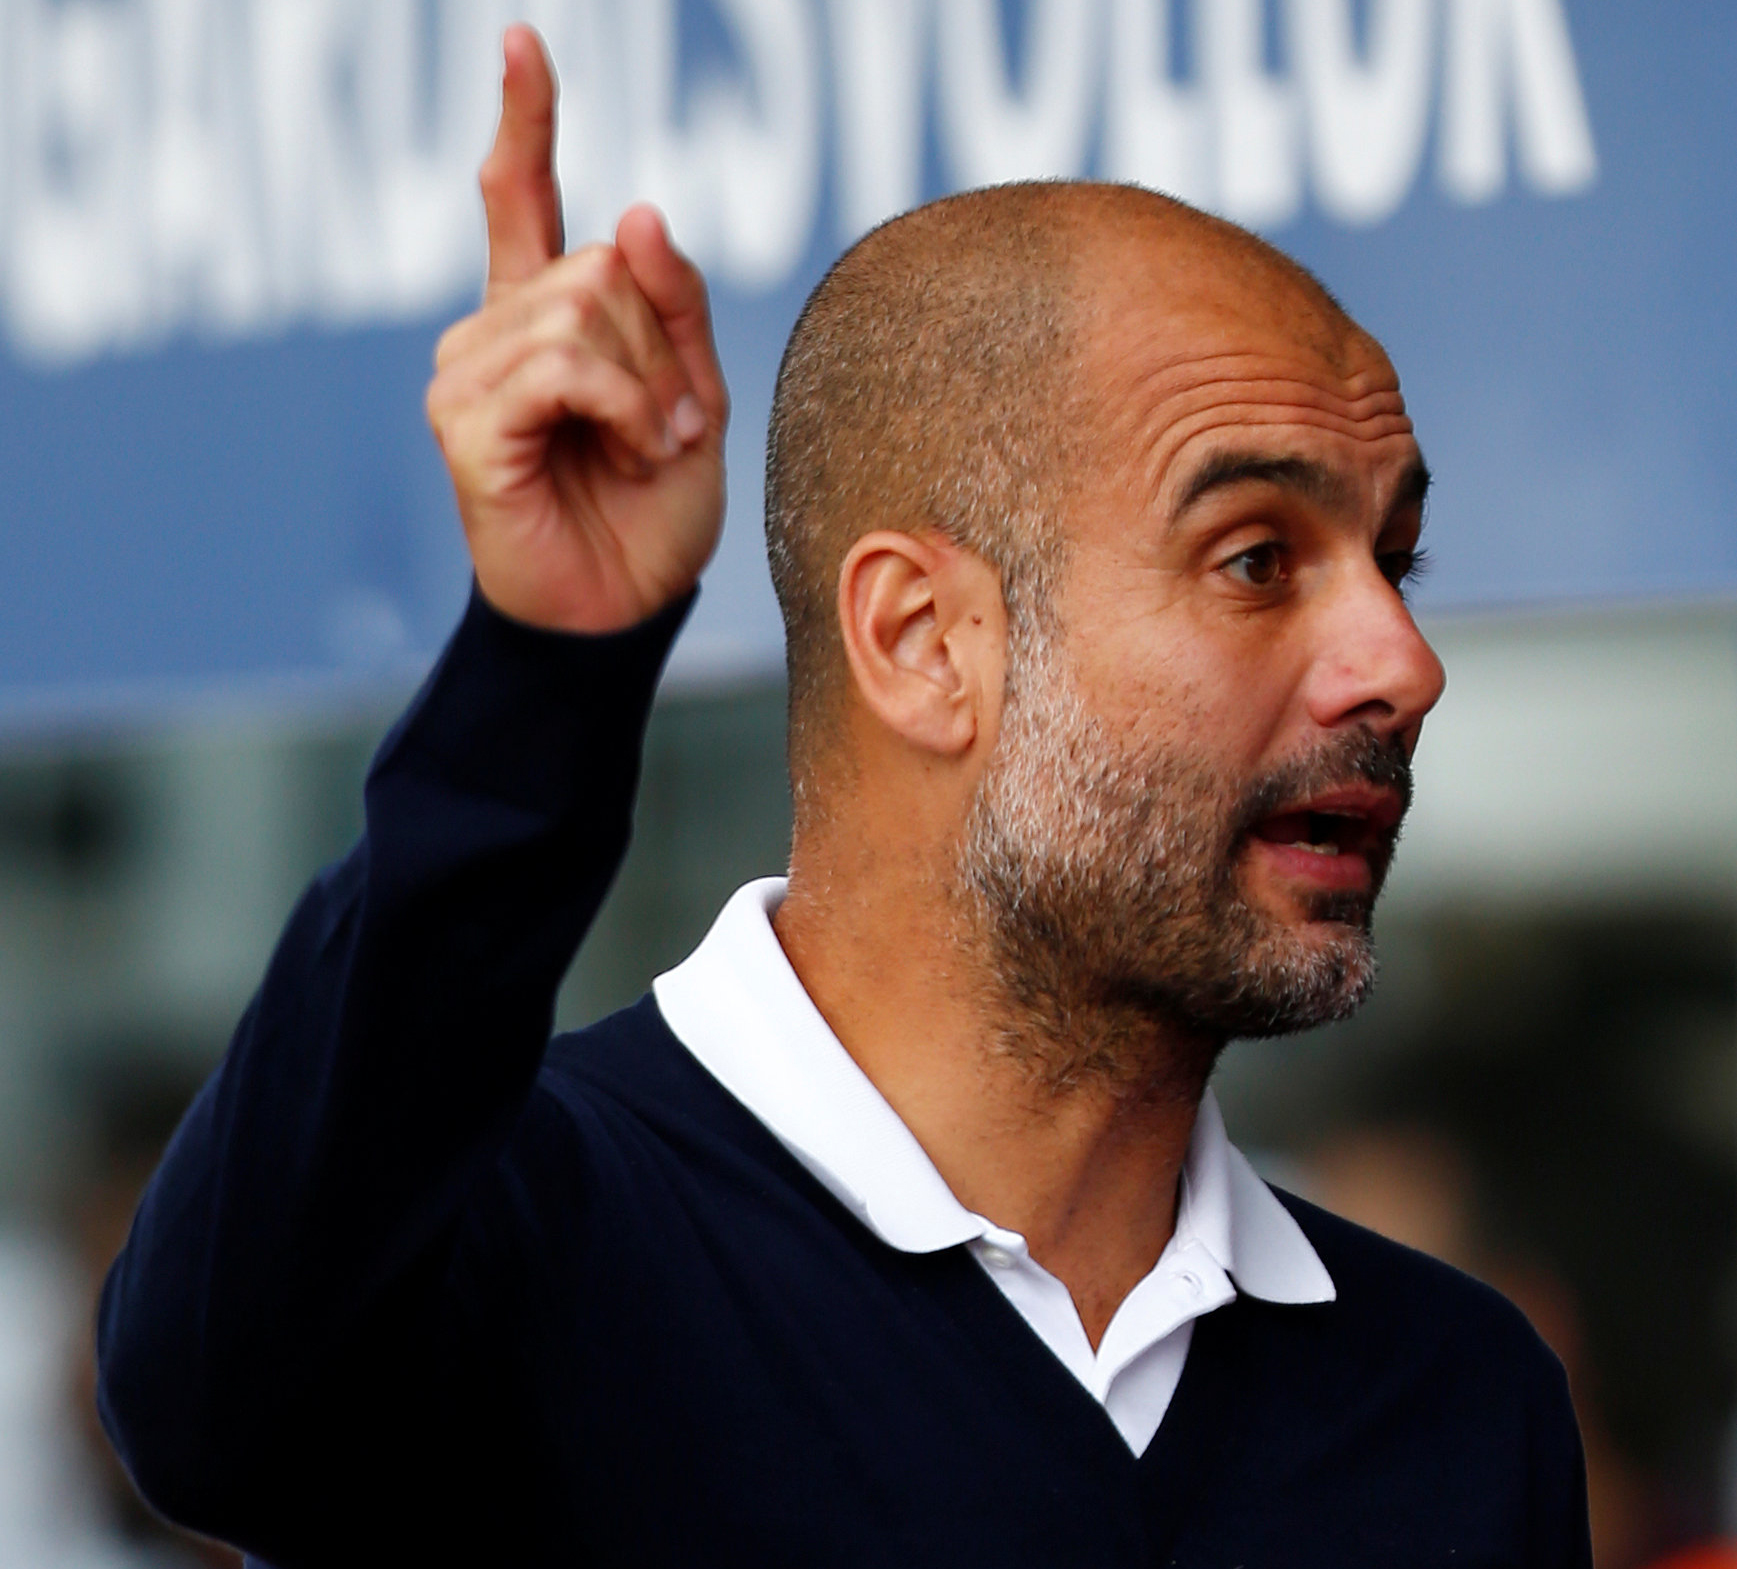 Footbll: Pressure on Guardiola, Mourinho to deliver on investment